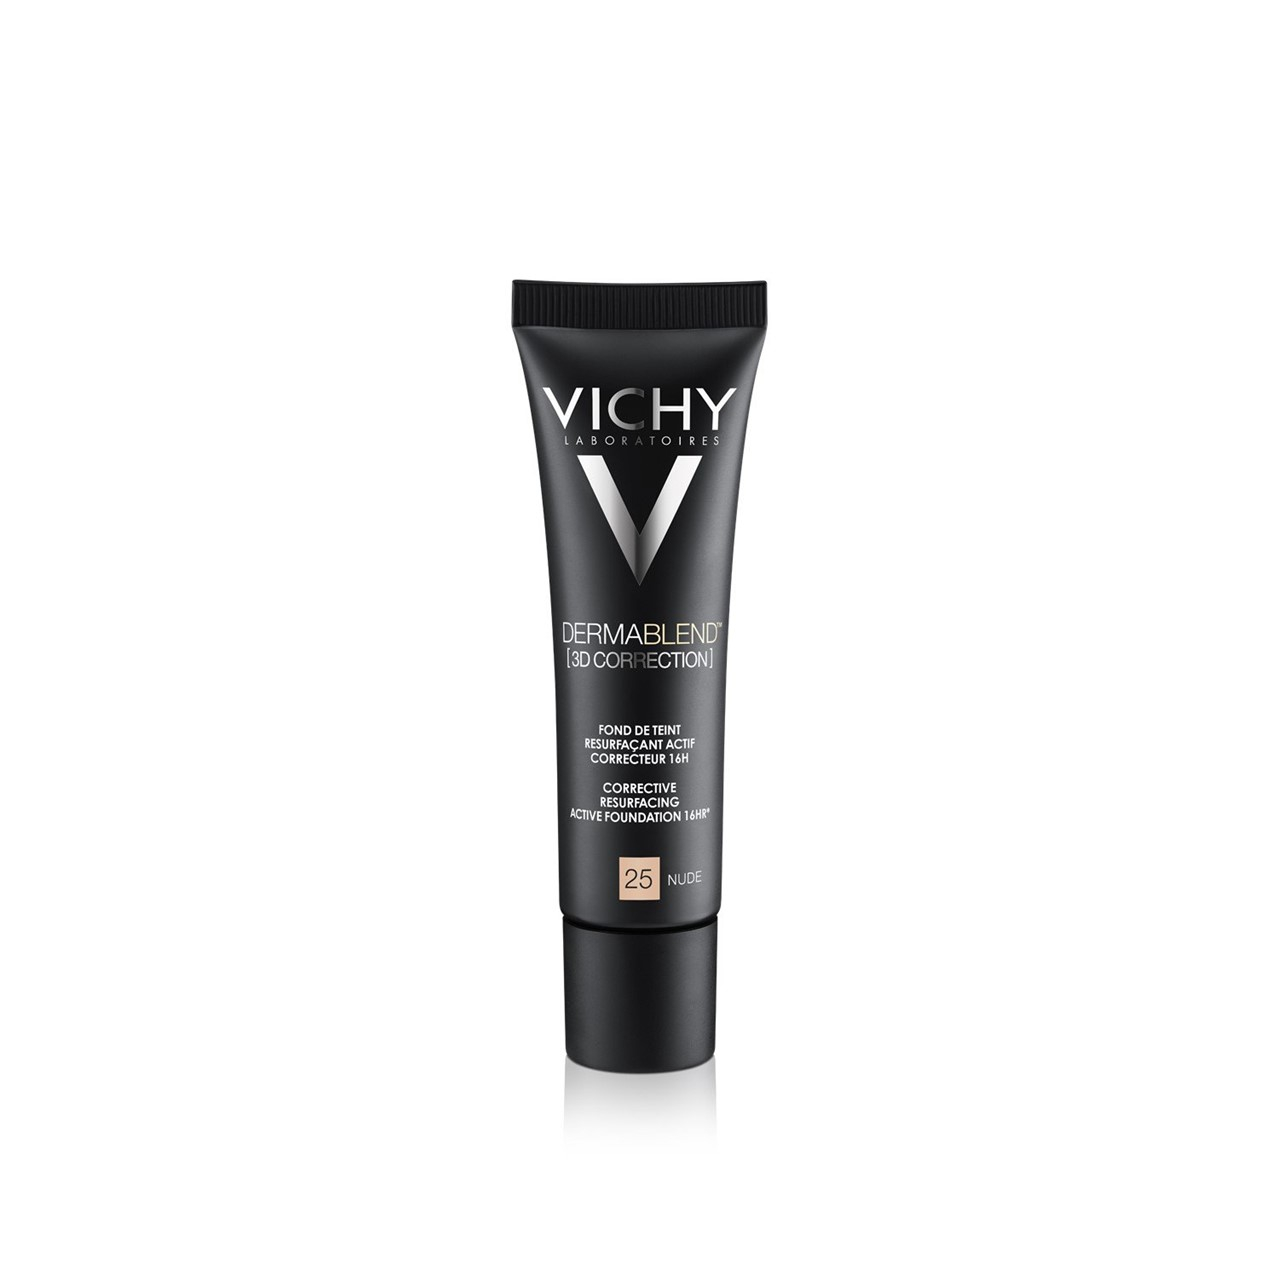 Vichy Dermablend 3D Correction Foundation 25 Nude 30ml